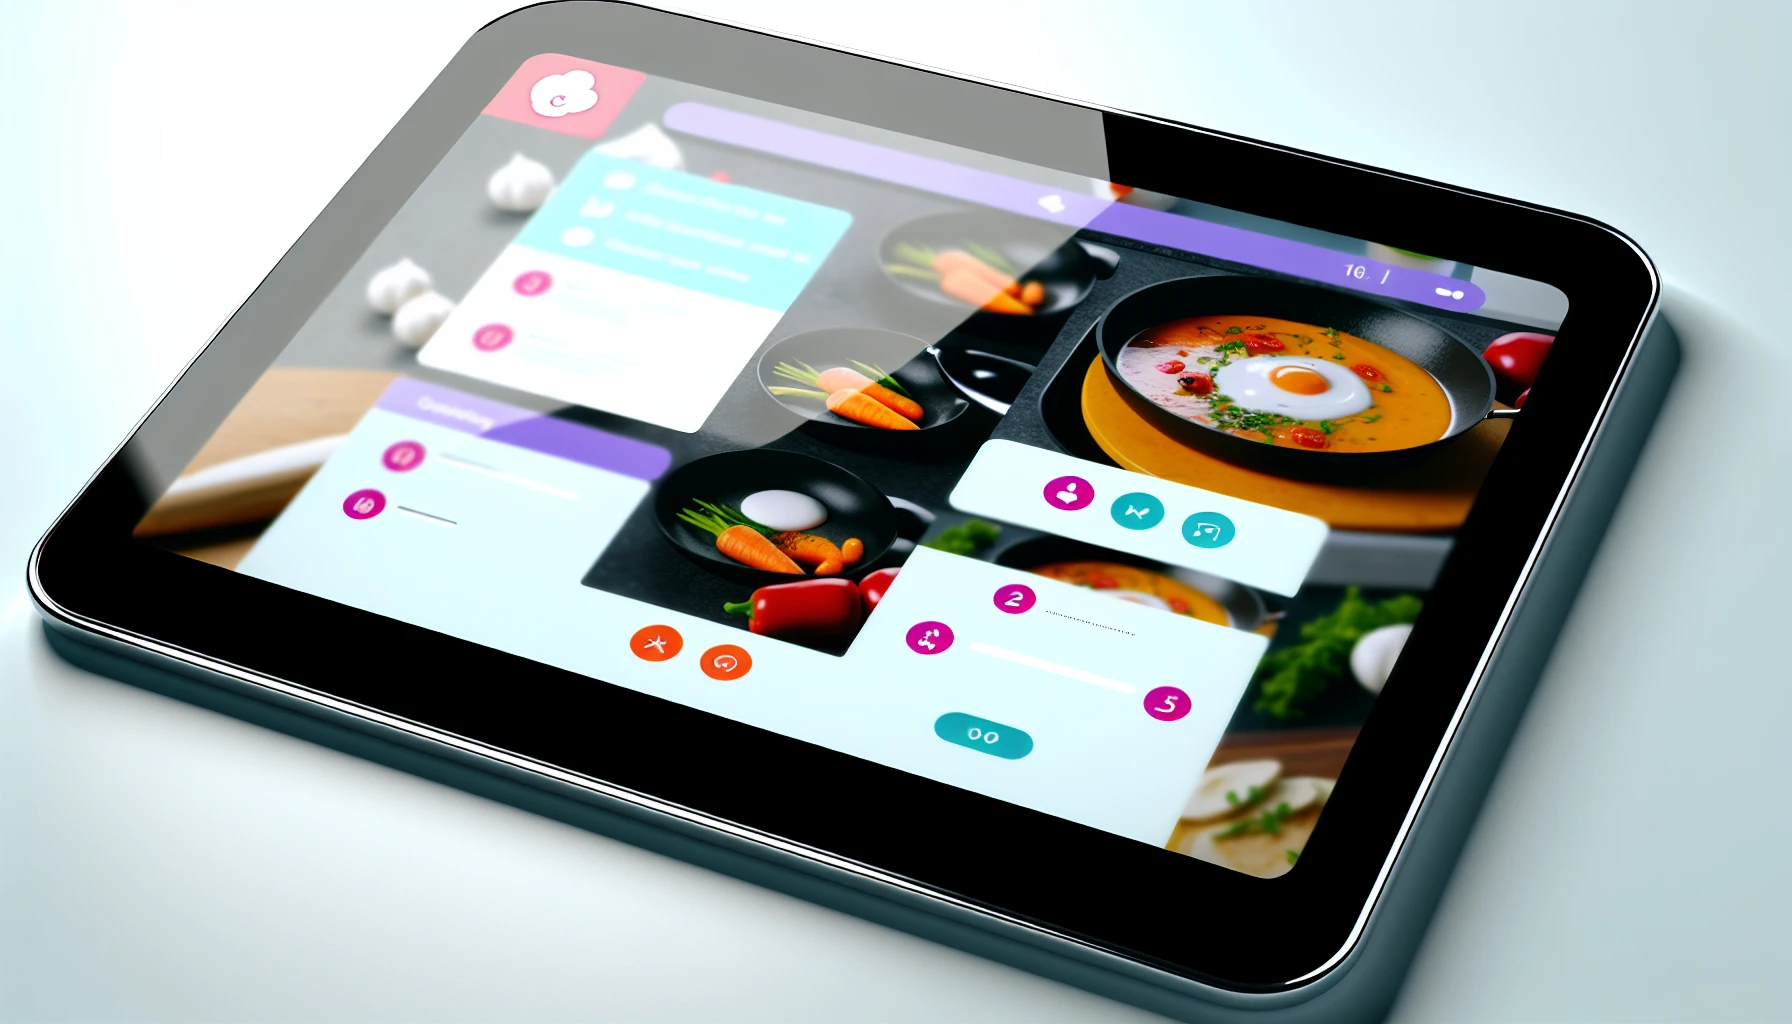 SideChef app providing interactive step-by-step guidance